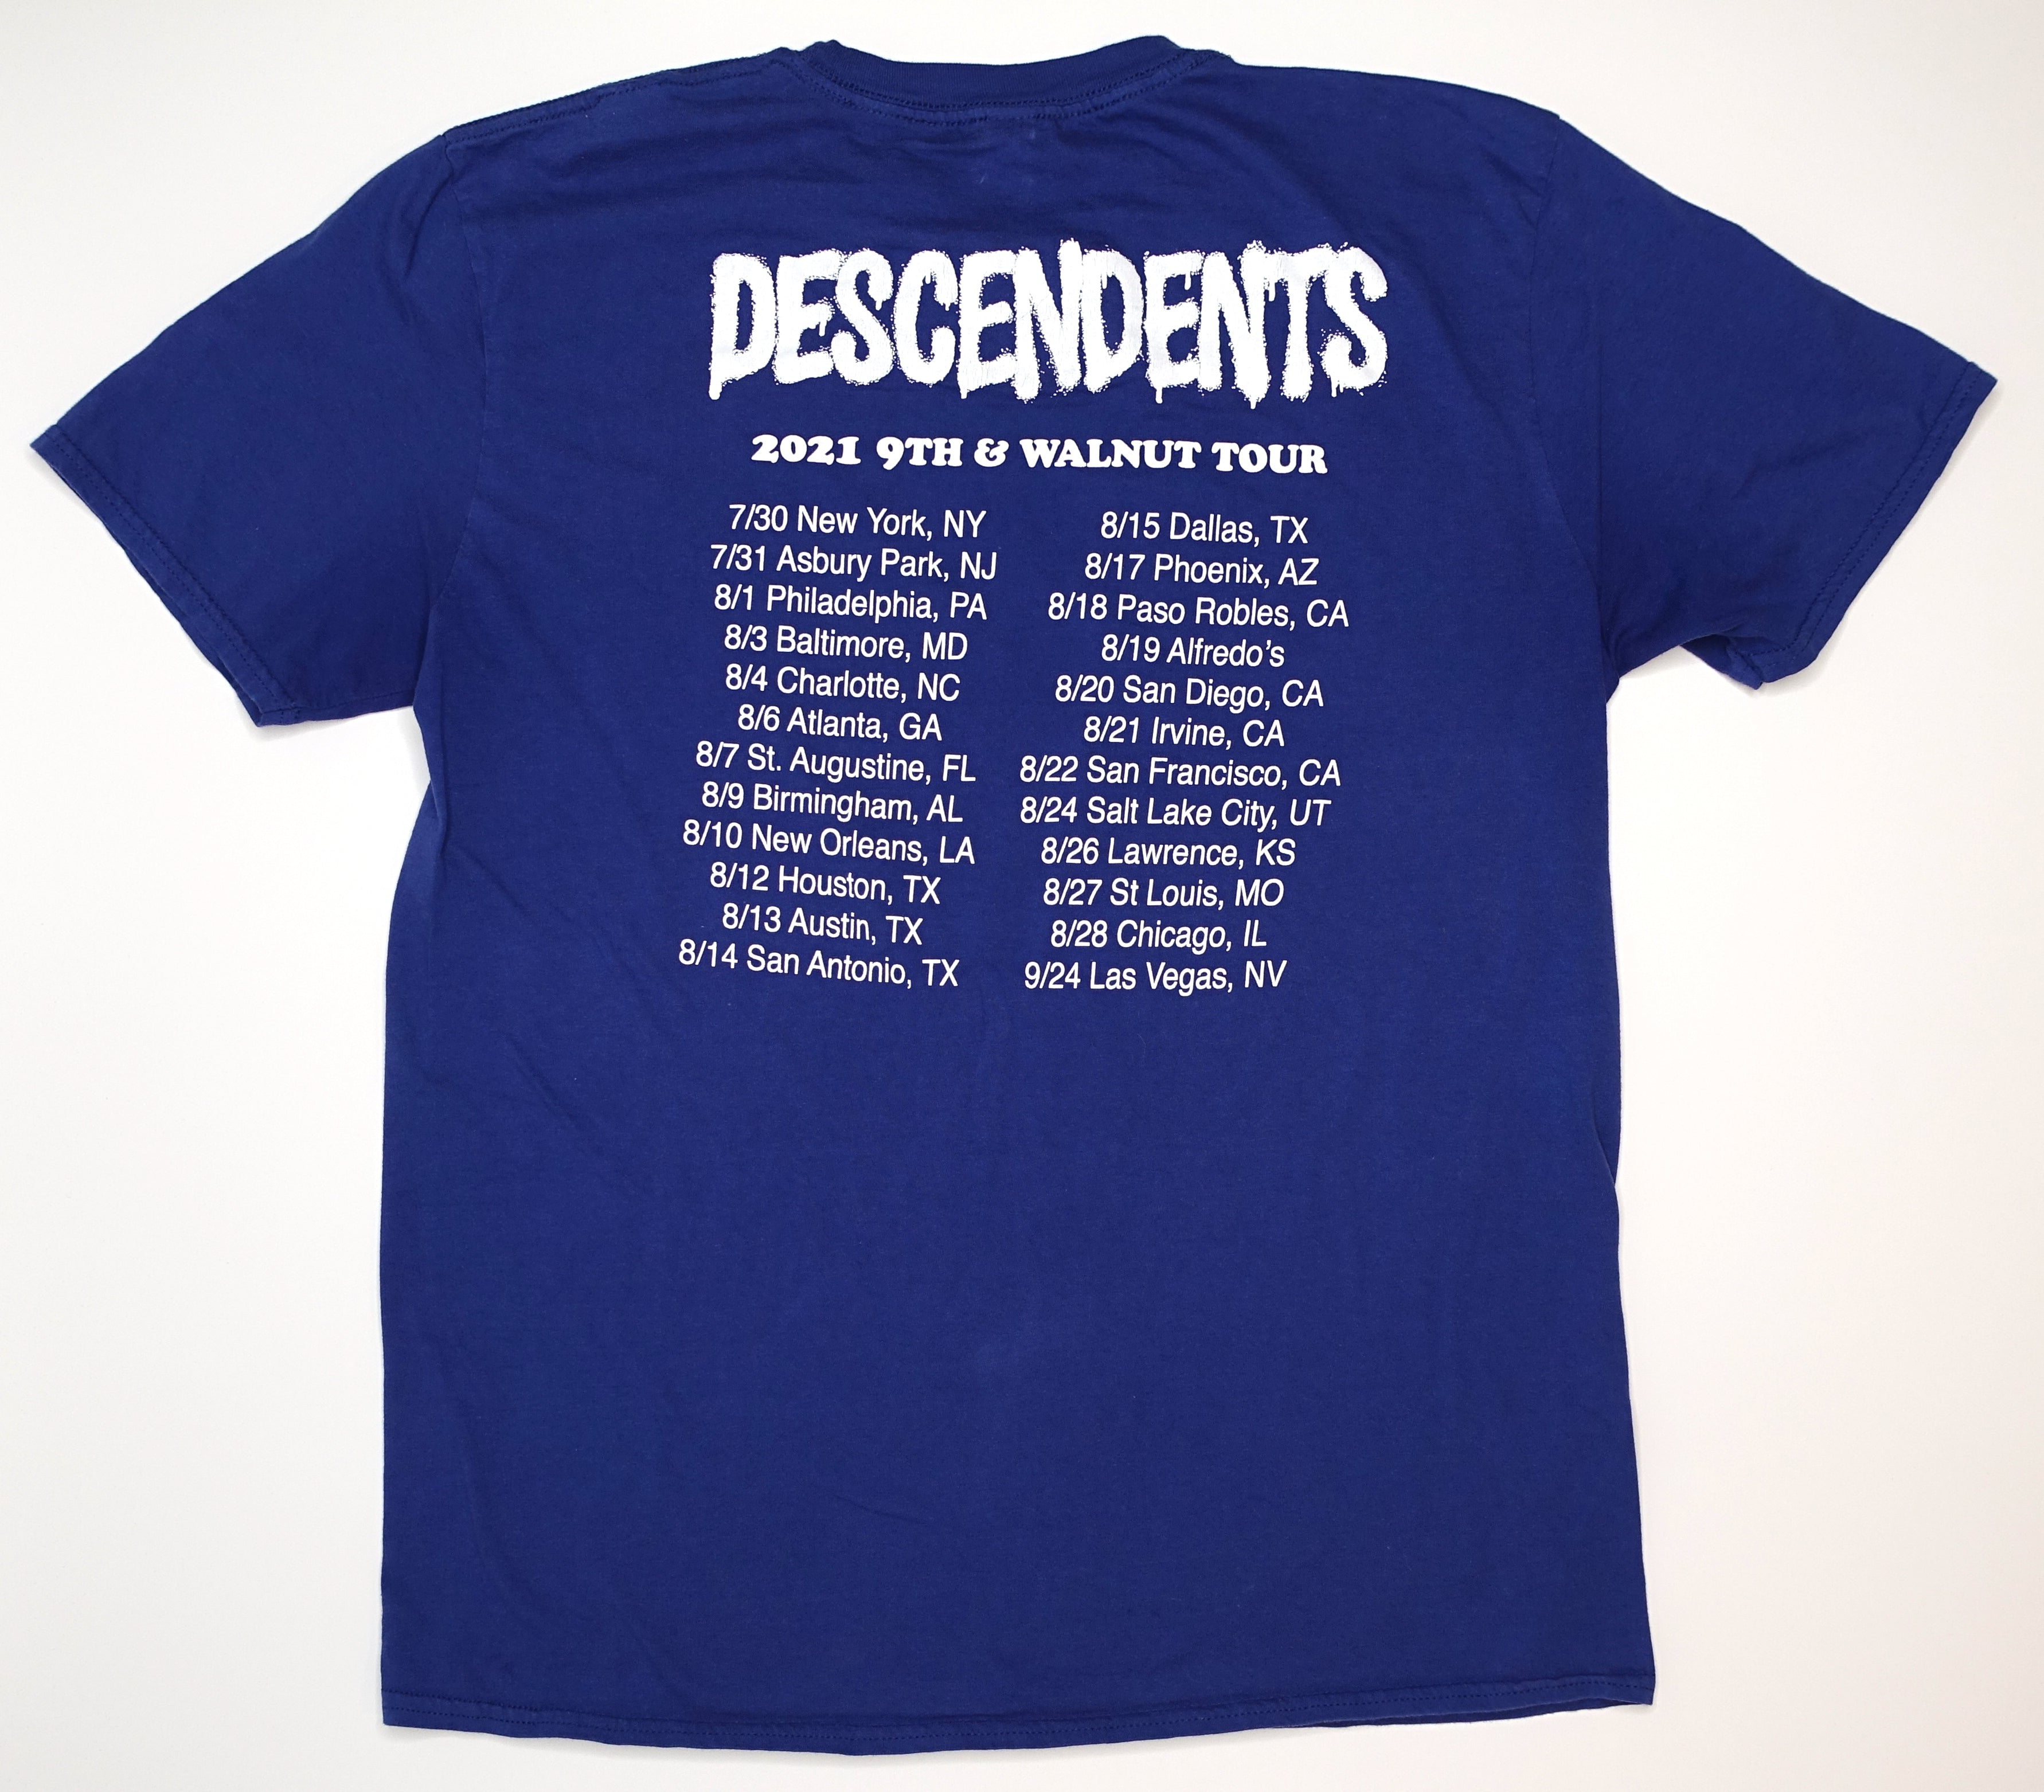 Descendents - 9th And Walnut 2021 Tour Shirt Size Large